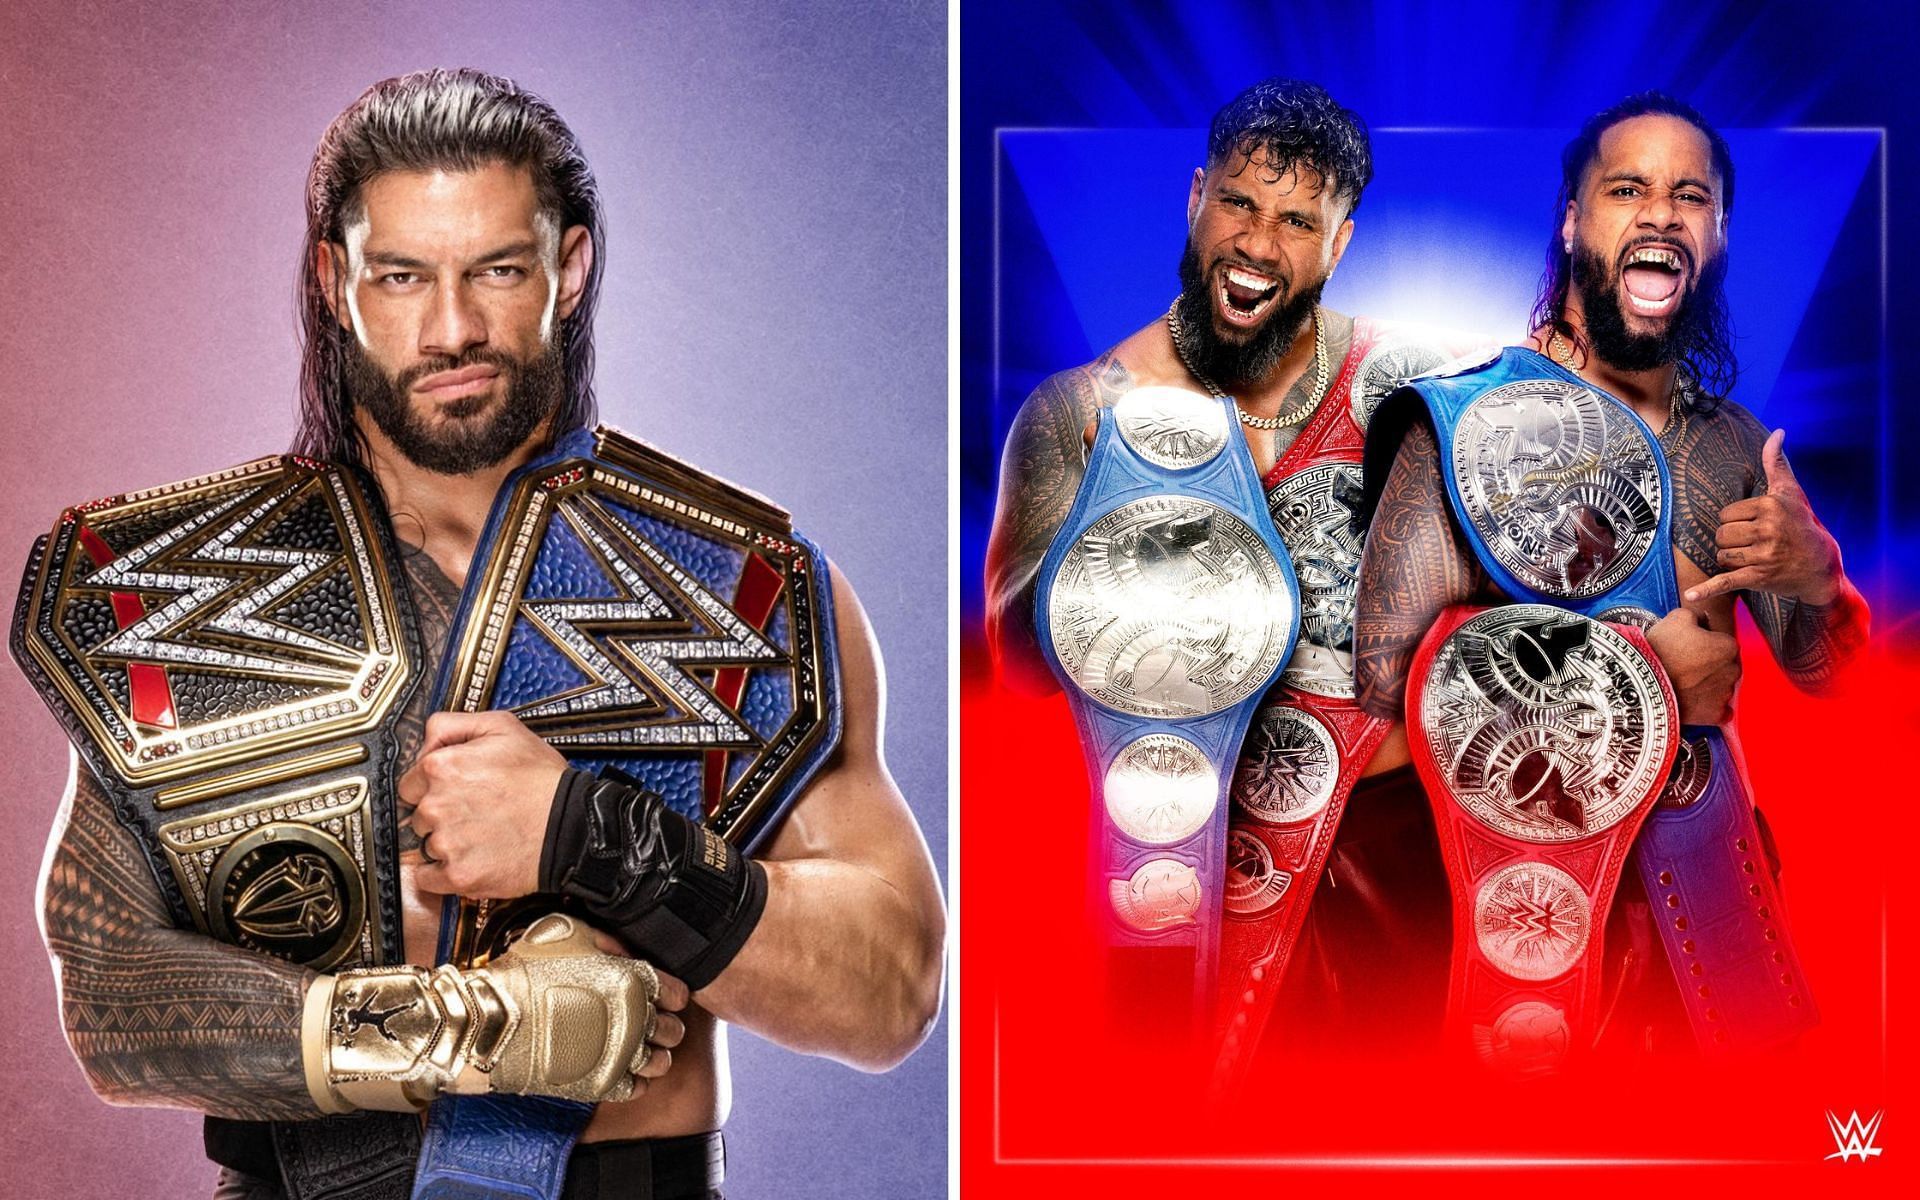 Roman Reigns and The Usos are the unified World and Tag Team Champions!